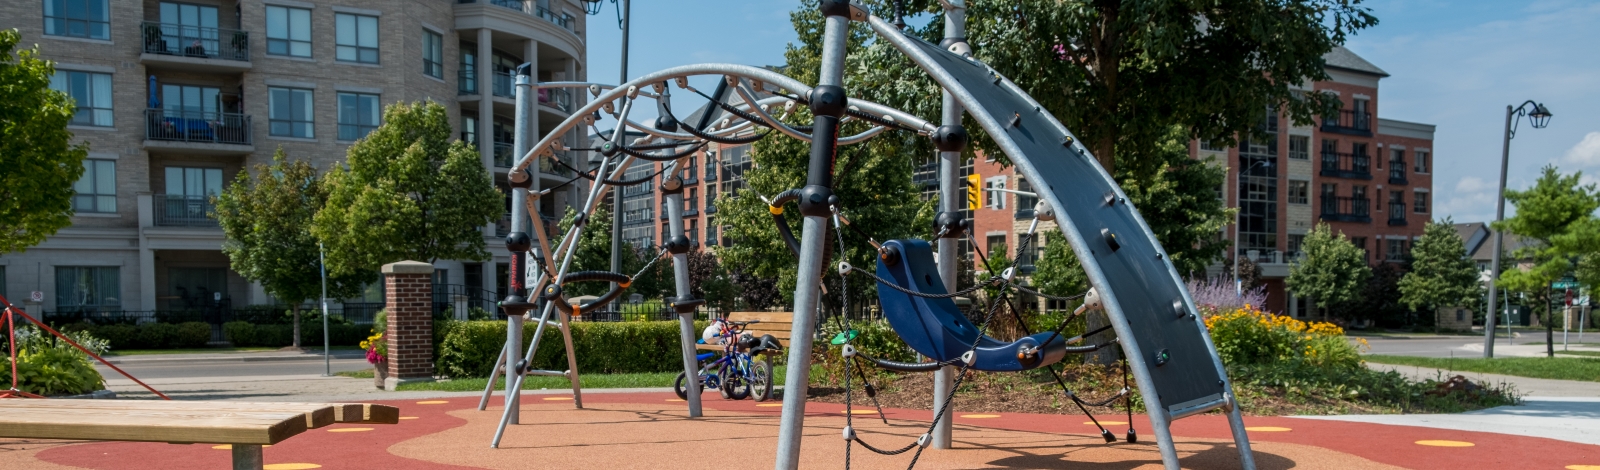 A playground with some apartments in the background